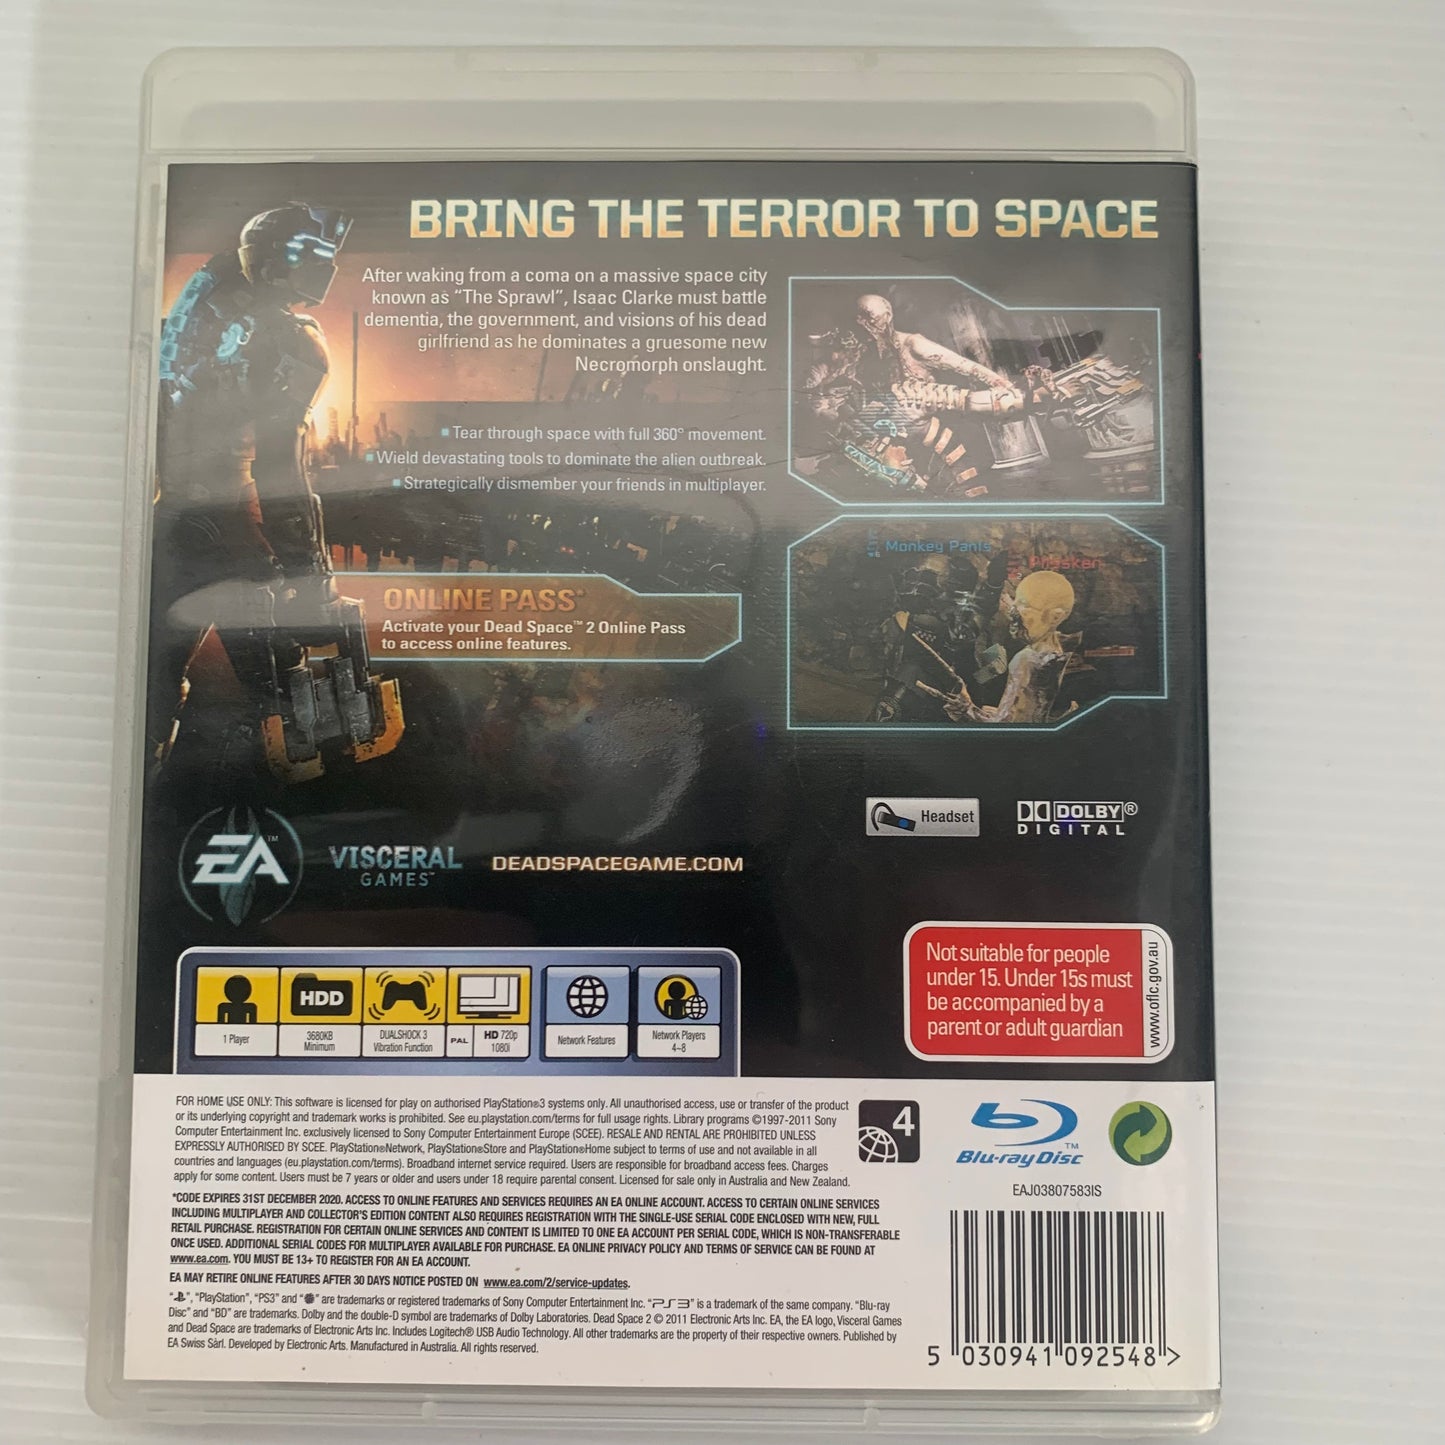 Dead Space 2 Playstation PS3 Game